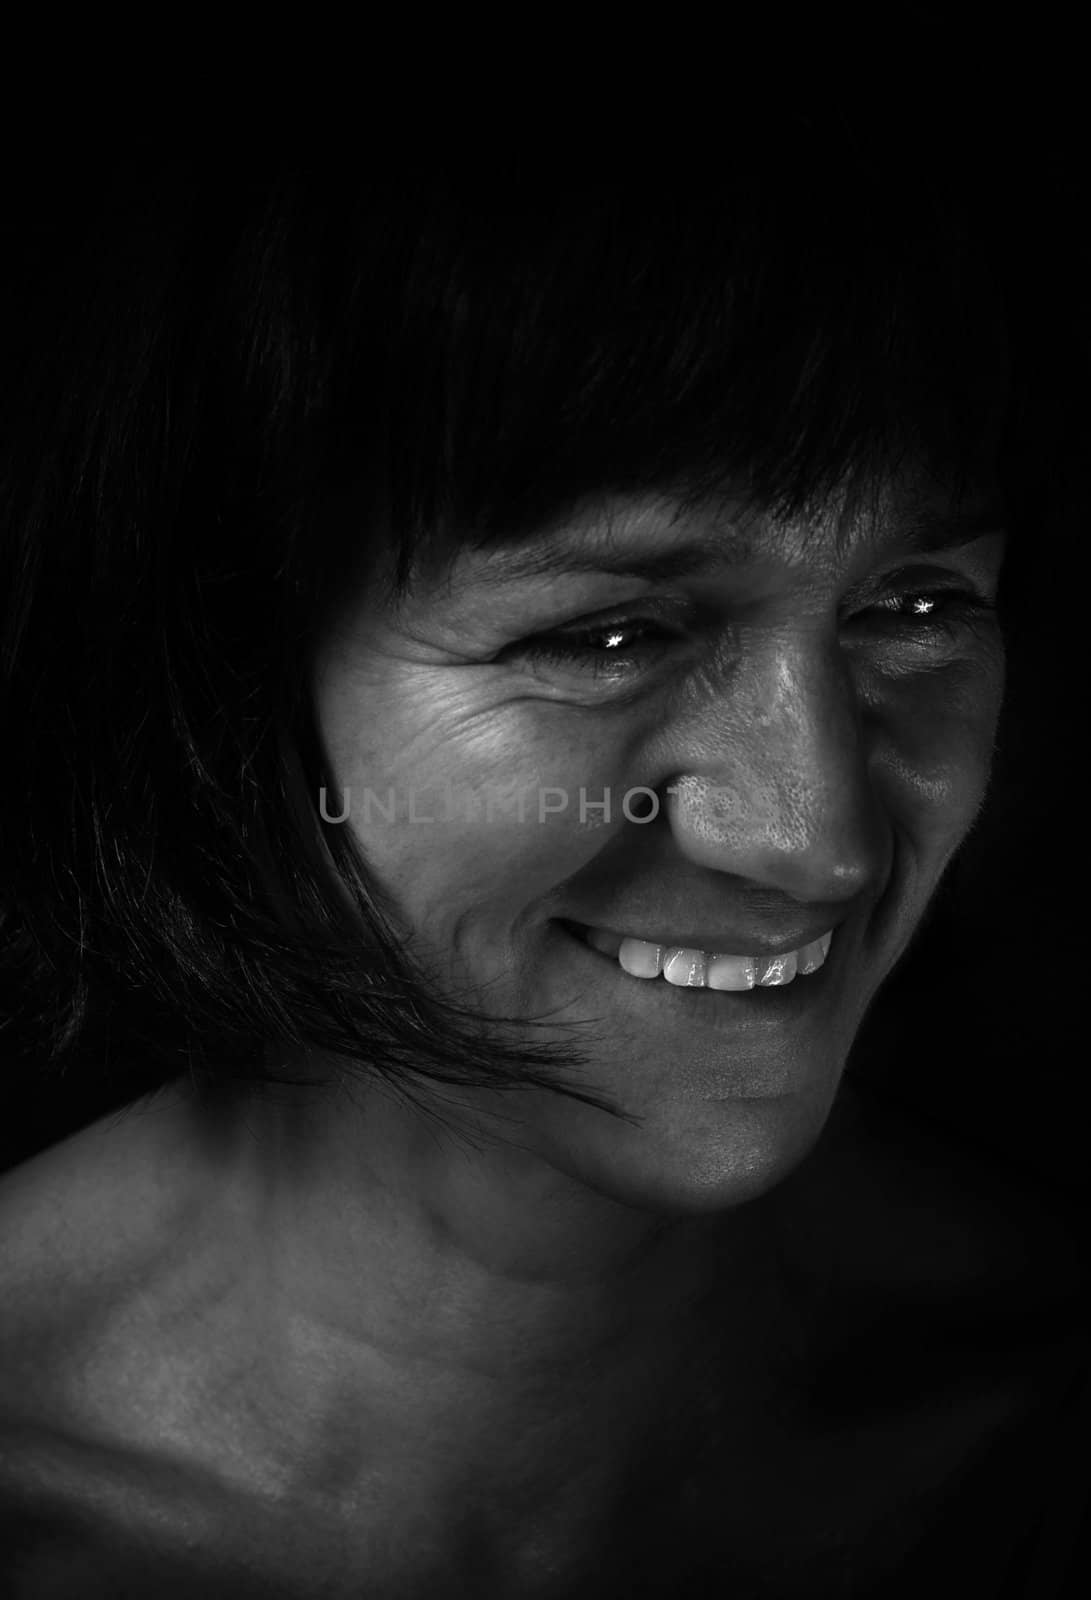 Smiling woman by domencolja